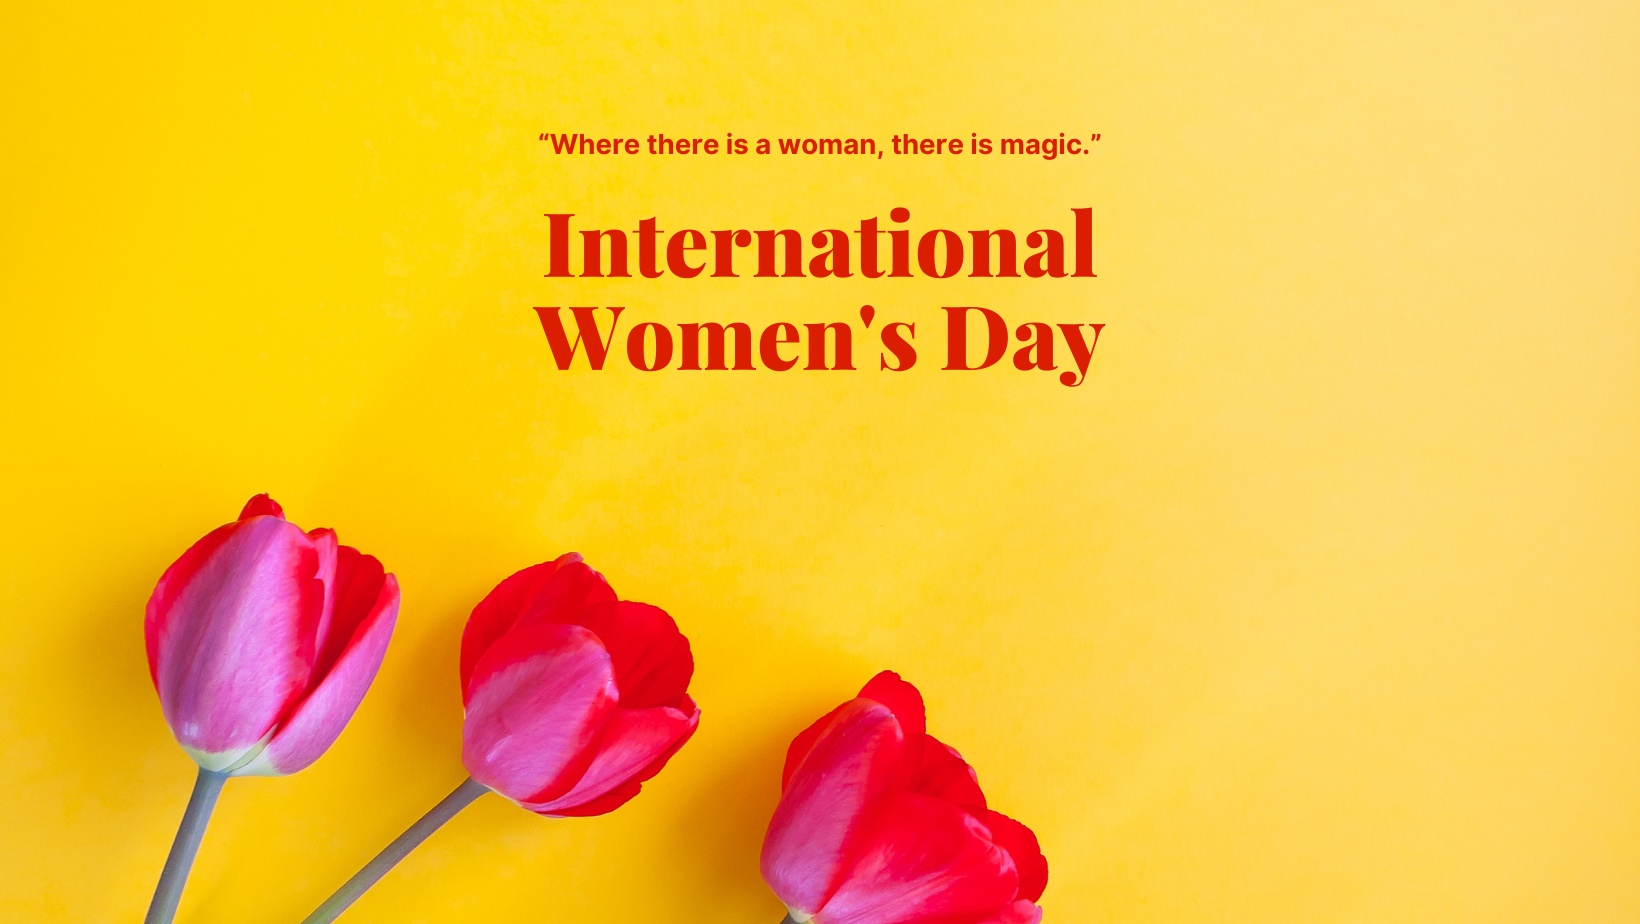 Women's day. A day to celebrate all women's accomplishments